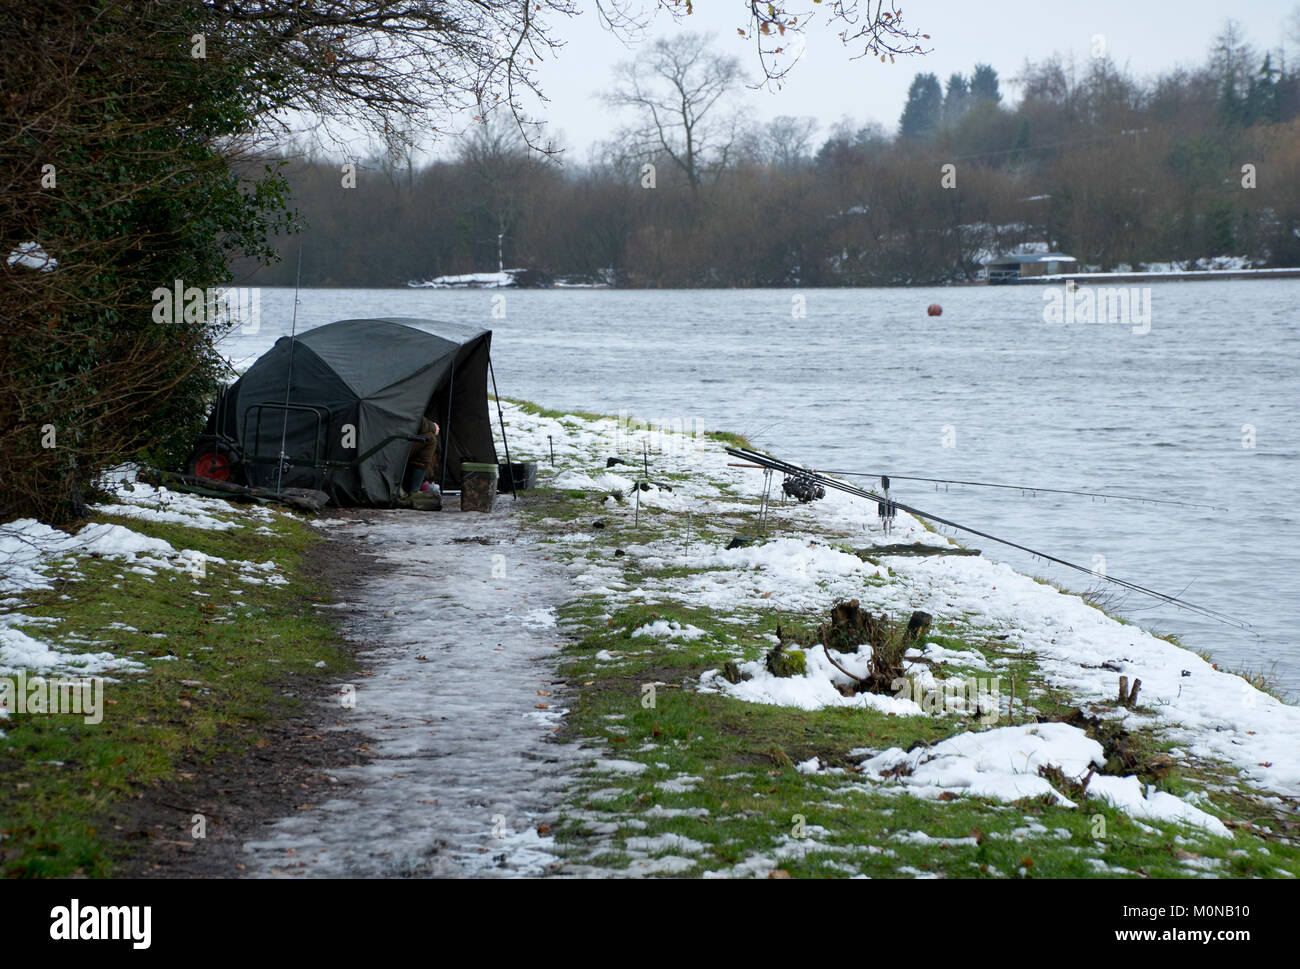 Fishing on a cold day with snow and ice on the ground. Angler sitting in a fishing shelter or tent while fishing a lake in England. Stock Photo